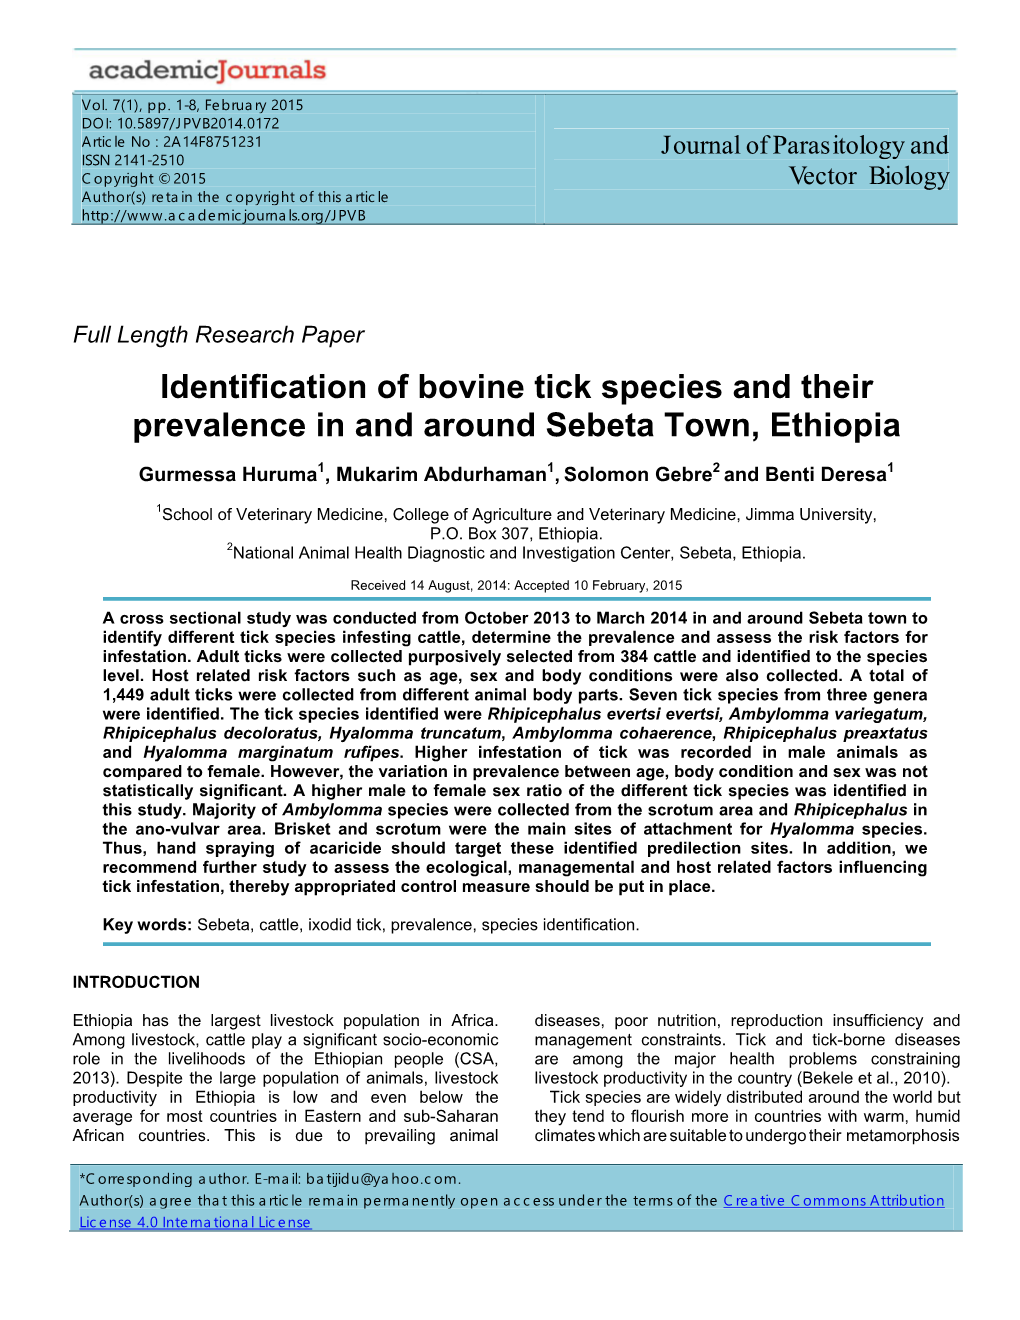 Identification of Bovine Tick Species and Their Prevalence in and Around Sebeta Town, Ethiopia